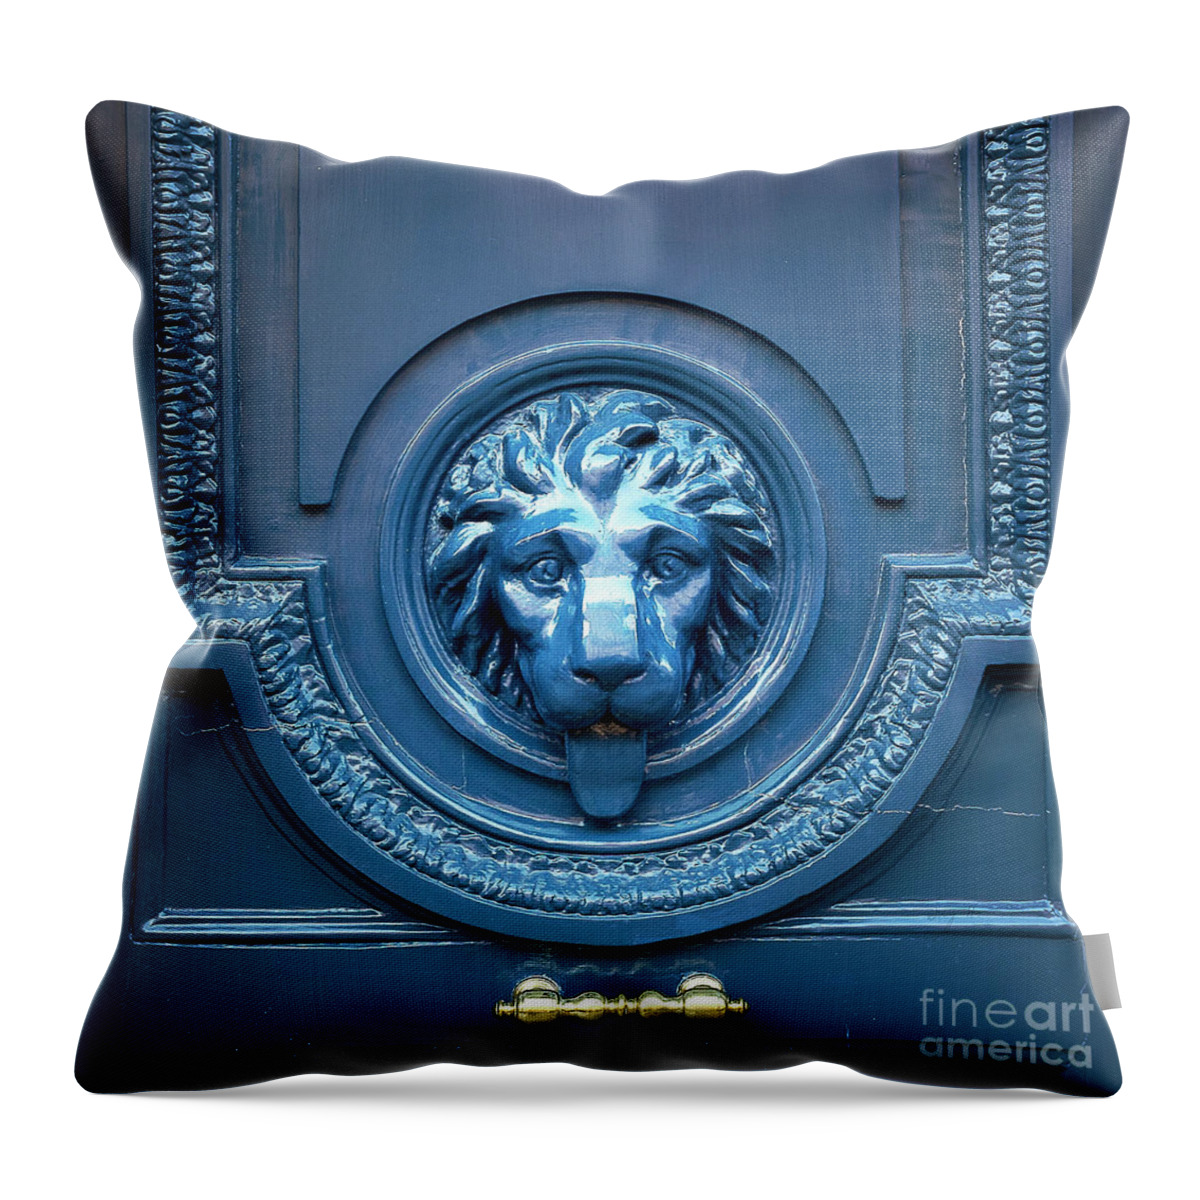 Photography; Ivy Ho; Angsanaseeds; Photograph; Travel; Europe; European; France; Continental; Paris; Wanderlust; City Of Lights; Cityscape; Architecture; Design; French; Door; Wood; Blue; Royal Blue; Copper; Ornate; Carving; Lion's Head; Lion's Mane; Square Photo Throw Pillow featuring the photograph Blue lion head door by Ivy Ho